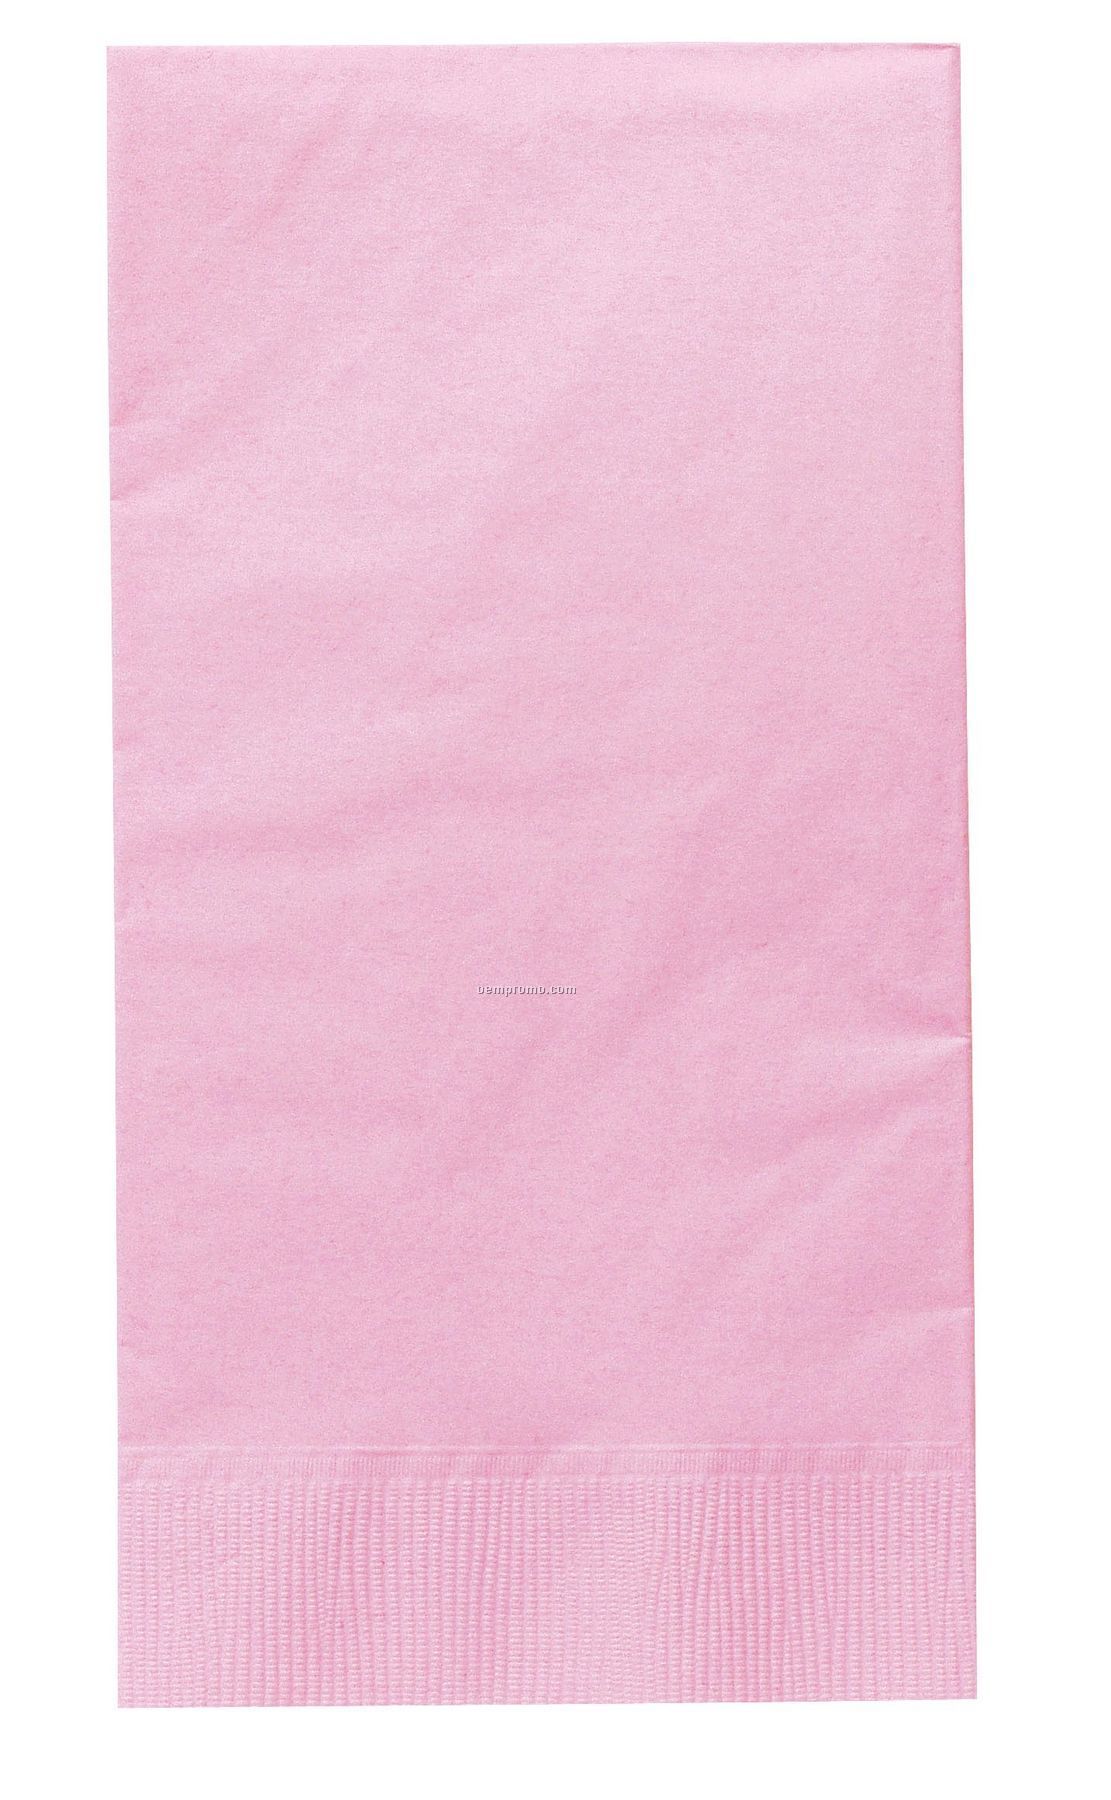 Colorware Classic Pink Dinner Napkins With 1/8 Fold